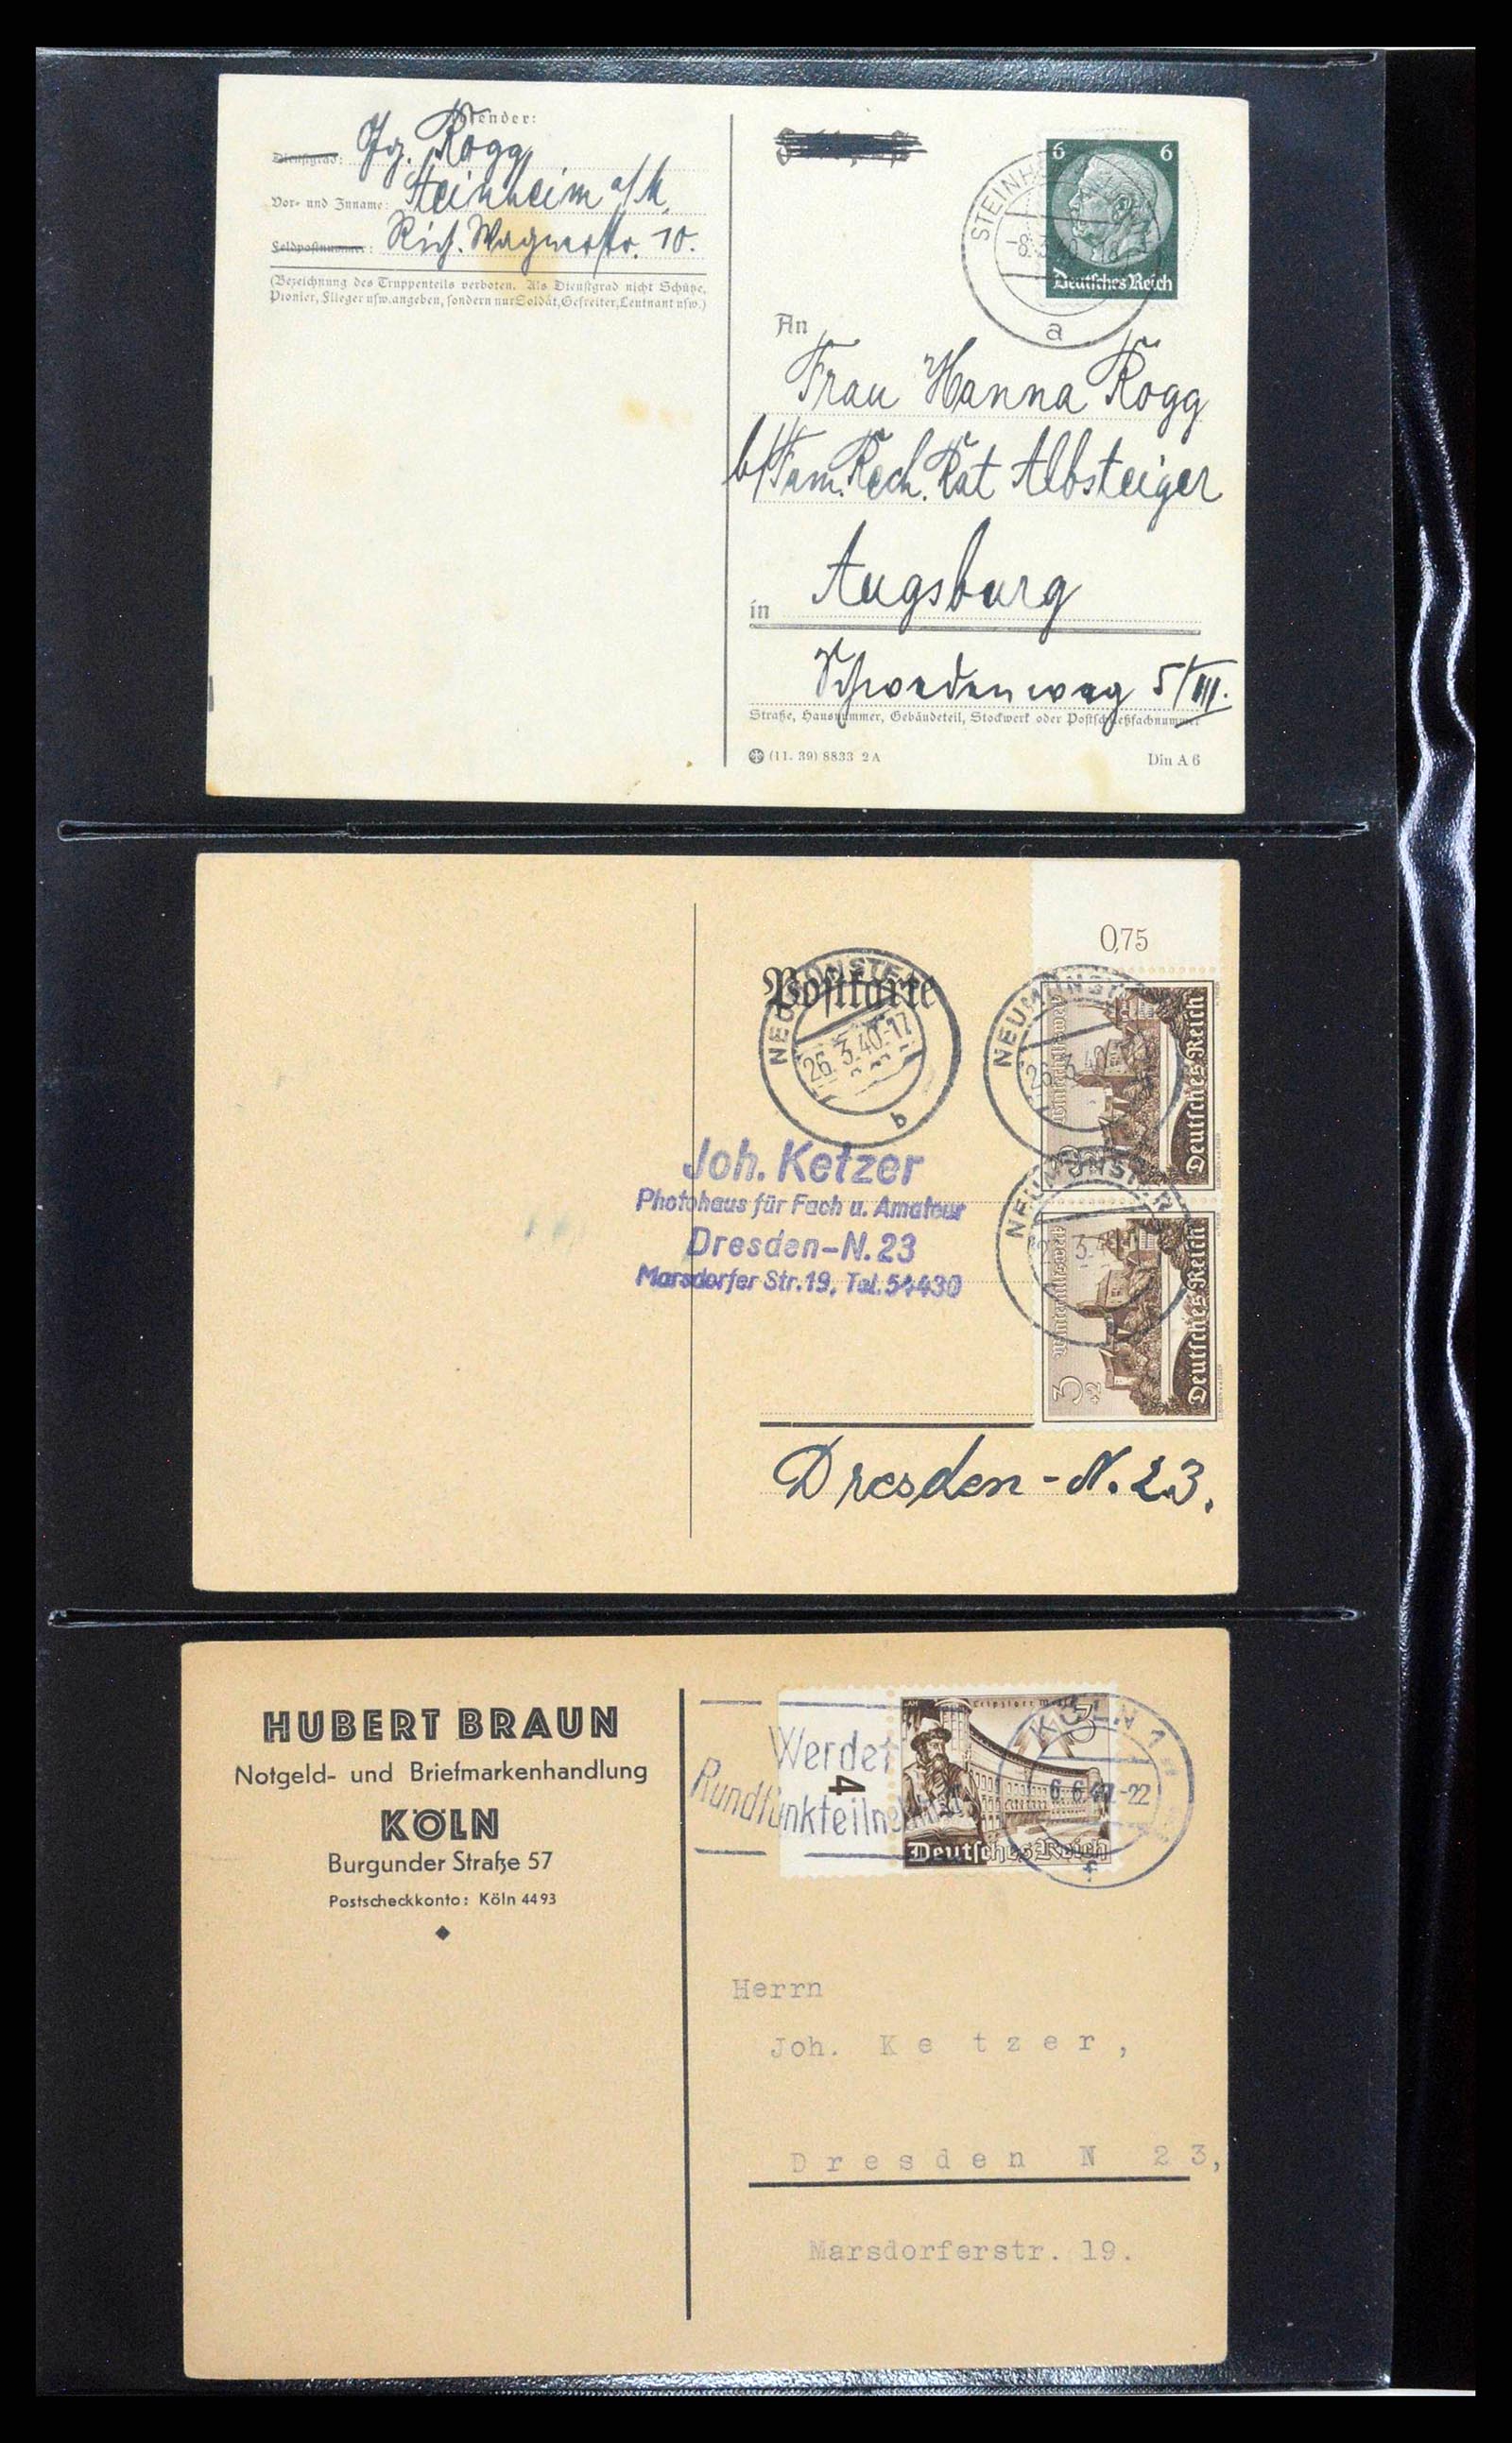 38646 0134 - Stamp collection 38646 Germany covers and cards 1940-1945.